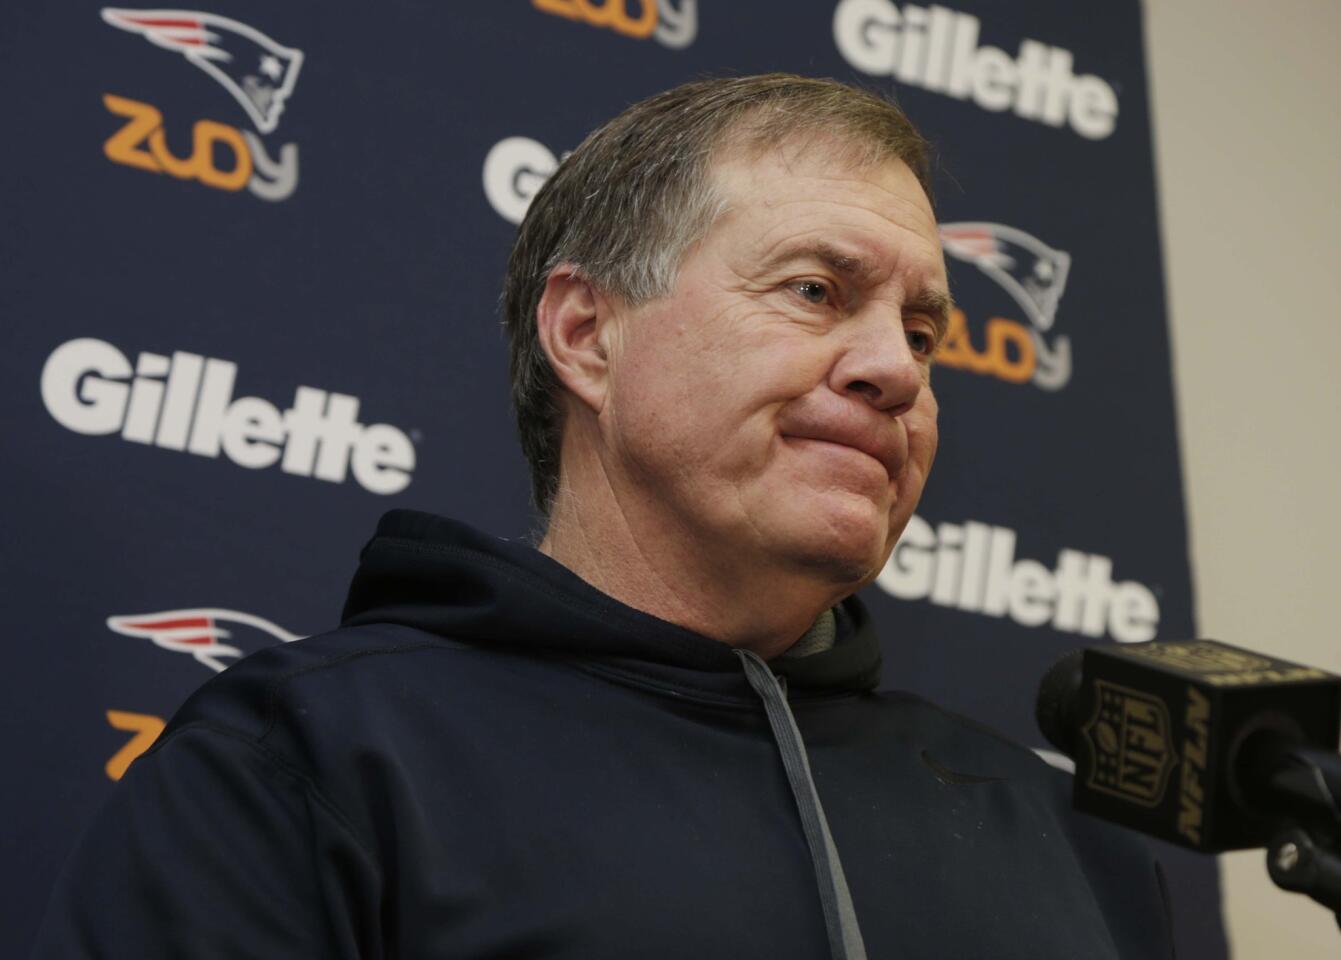 No team has hung more losses on Bill Belichick's sterling record than Miami